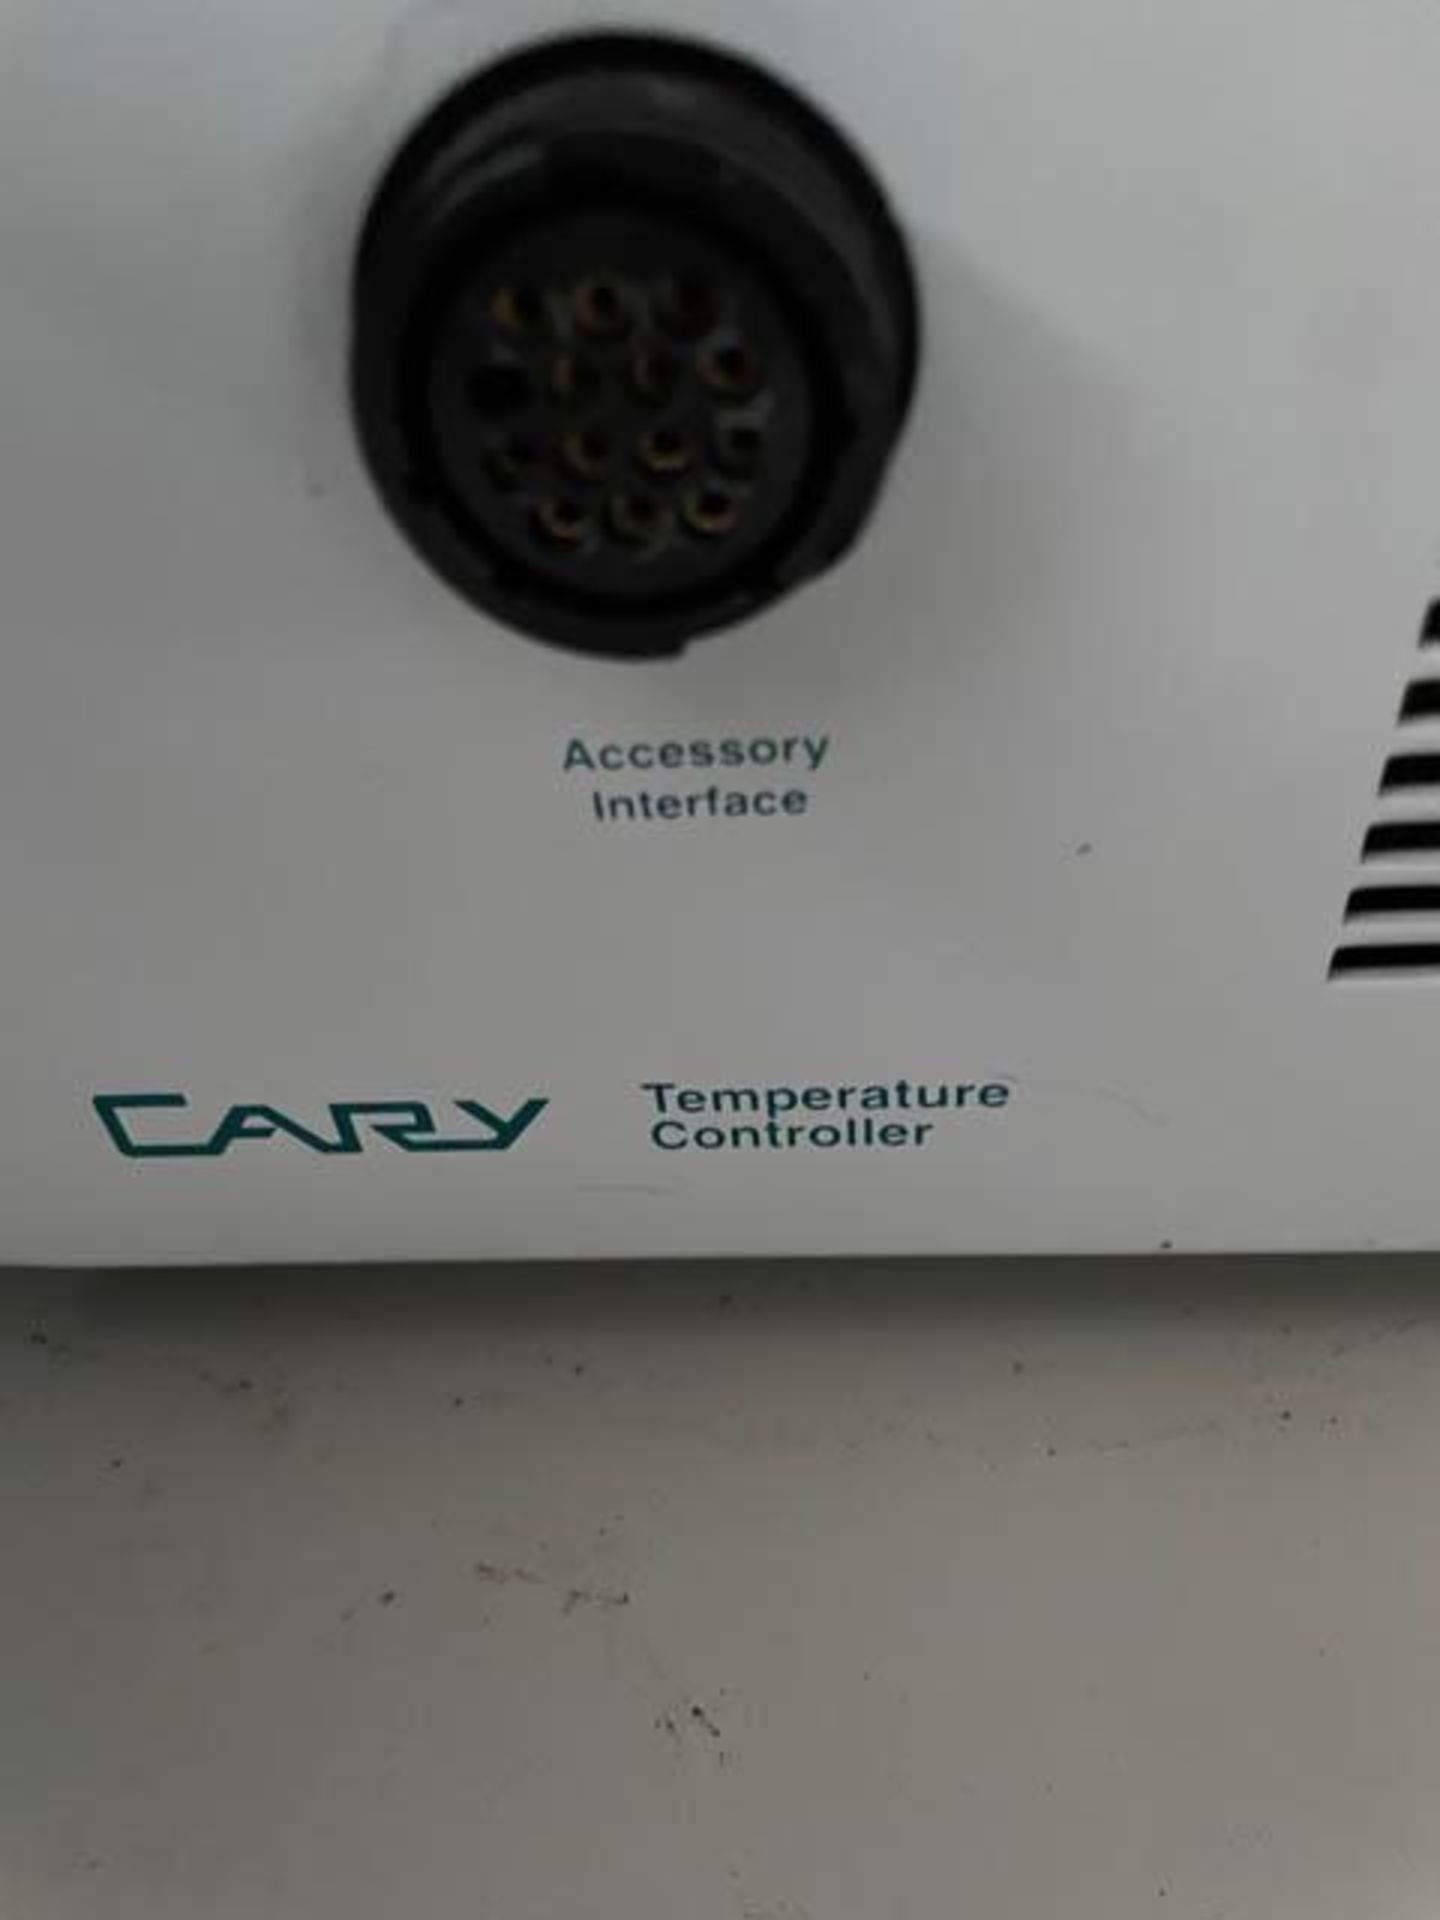 Cary Temperature Controller - Image 2 of 2